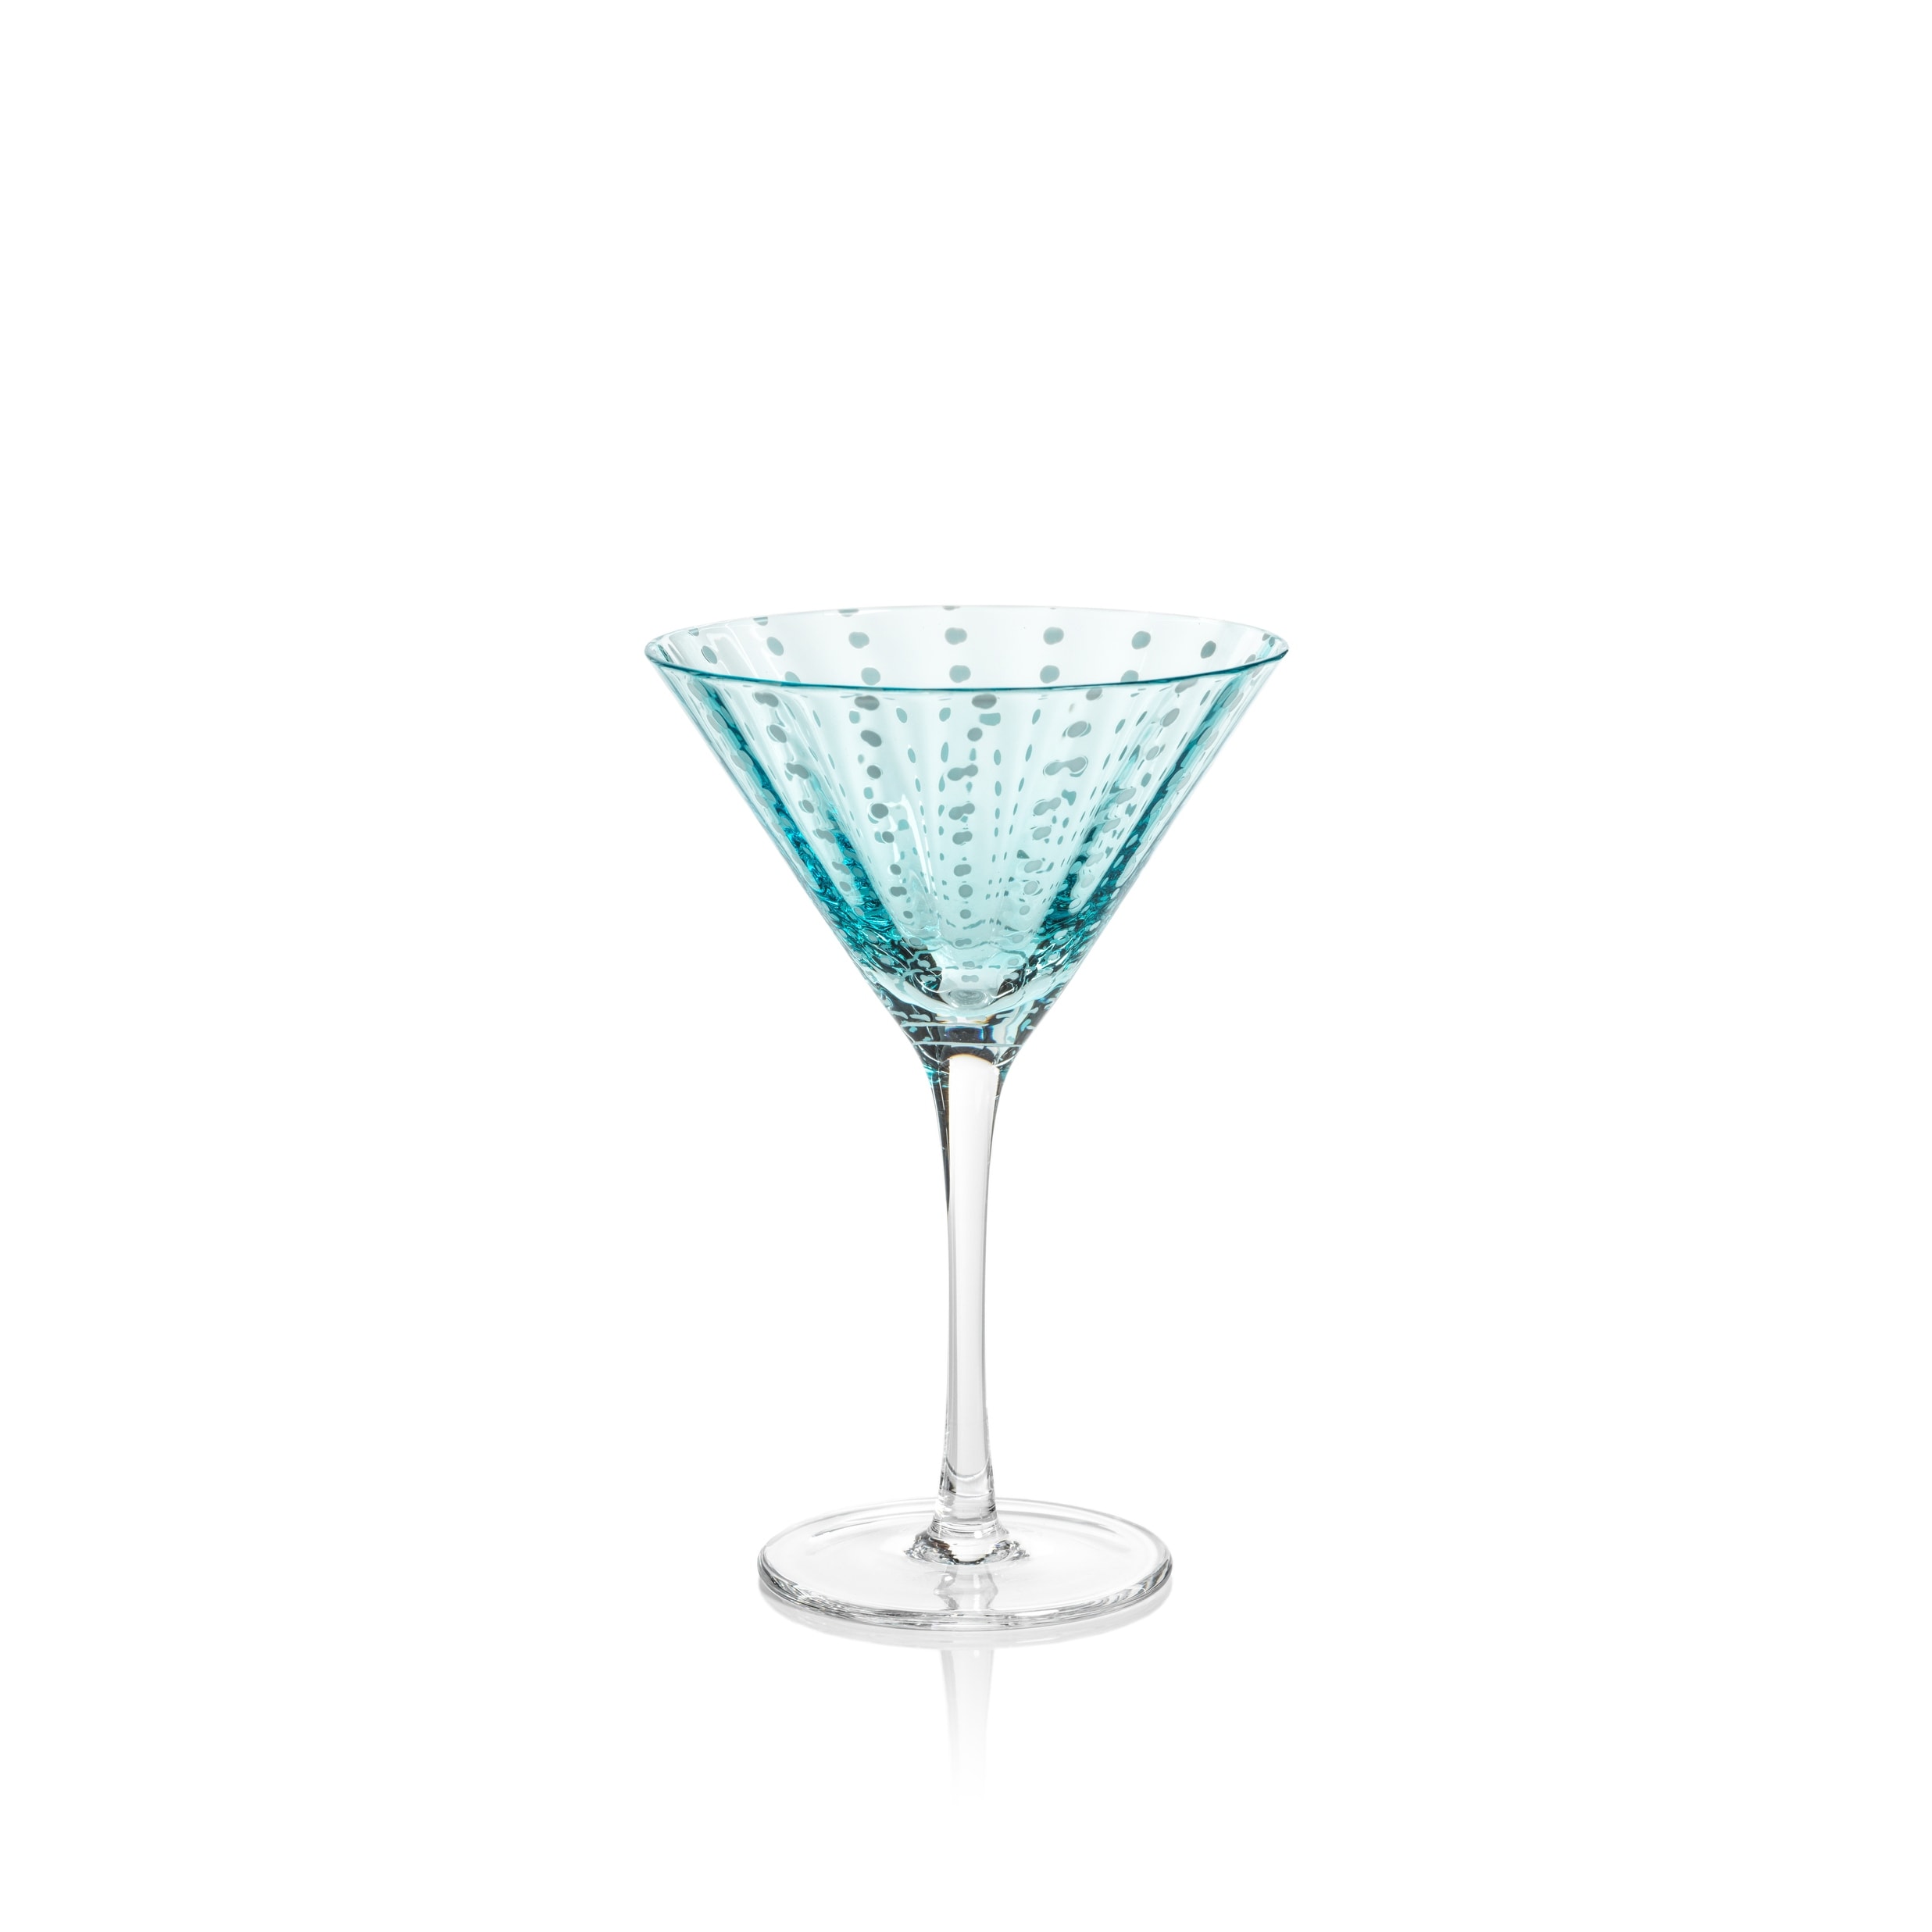 https://ak1.ostkcdn.com/images/products/is/images/direct/cd14d7cb7b6db7fc1a587d12f70483fb9d8e8ecc/Pescara-White-Dot-Martini-Glasses%2C-Set-of-4.jpg